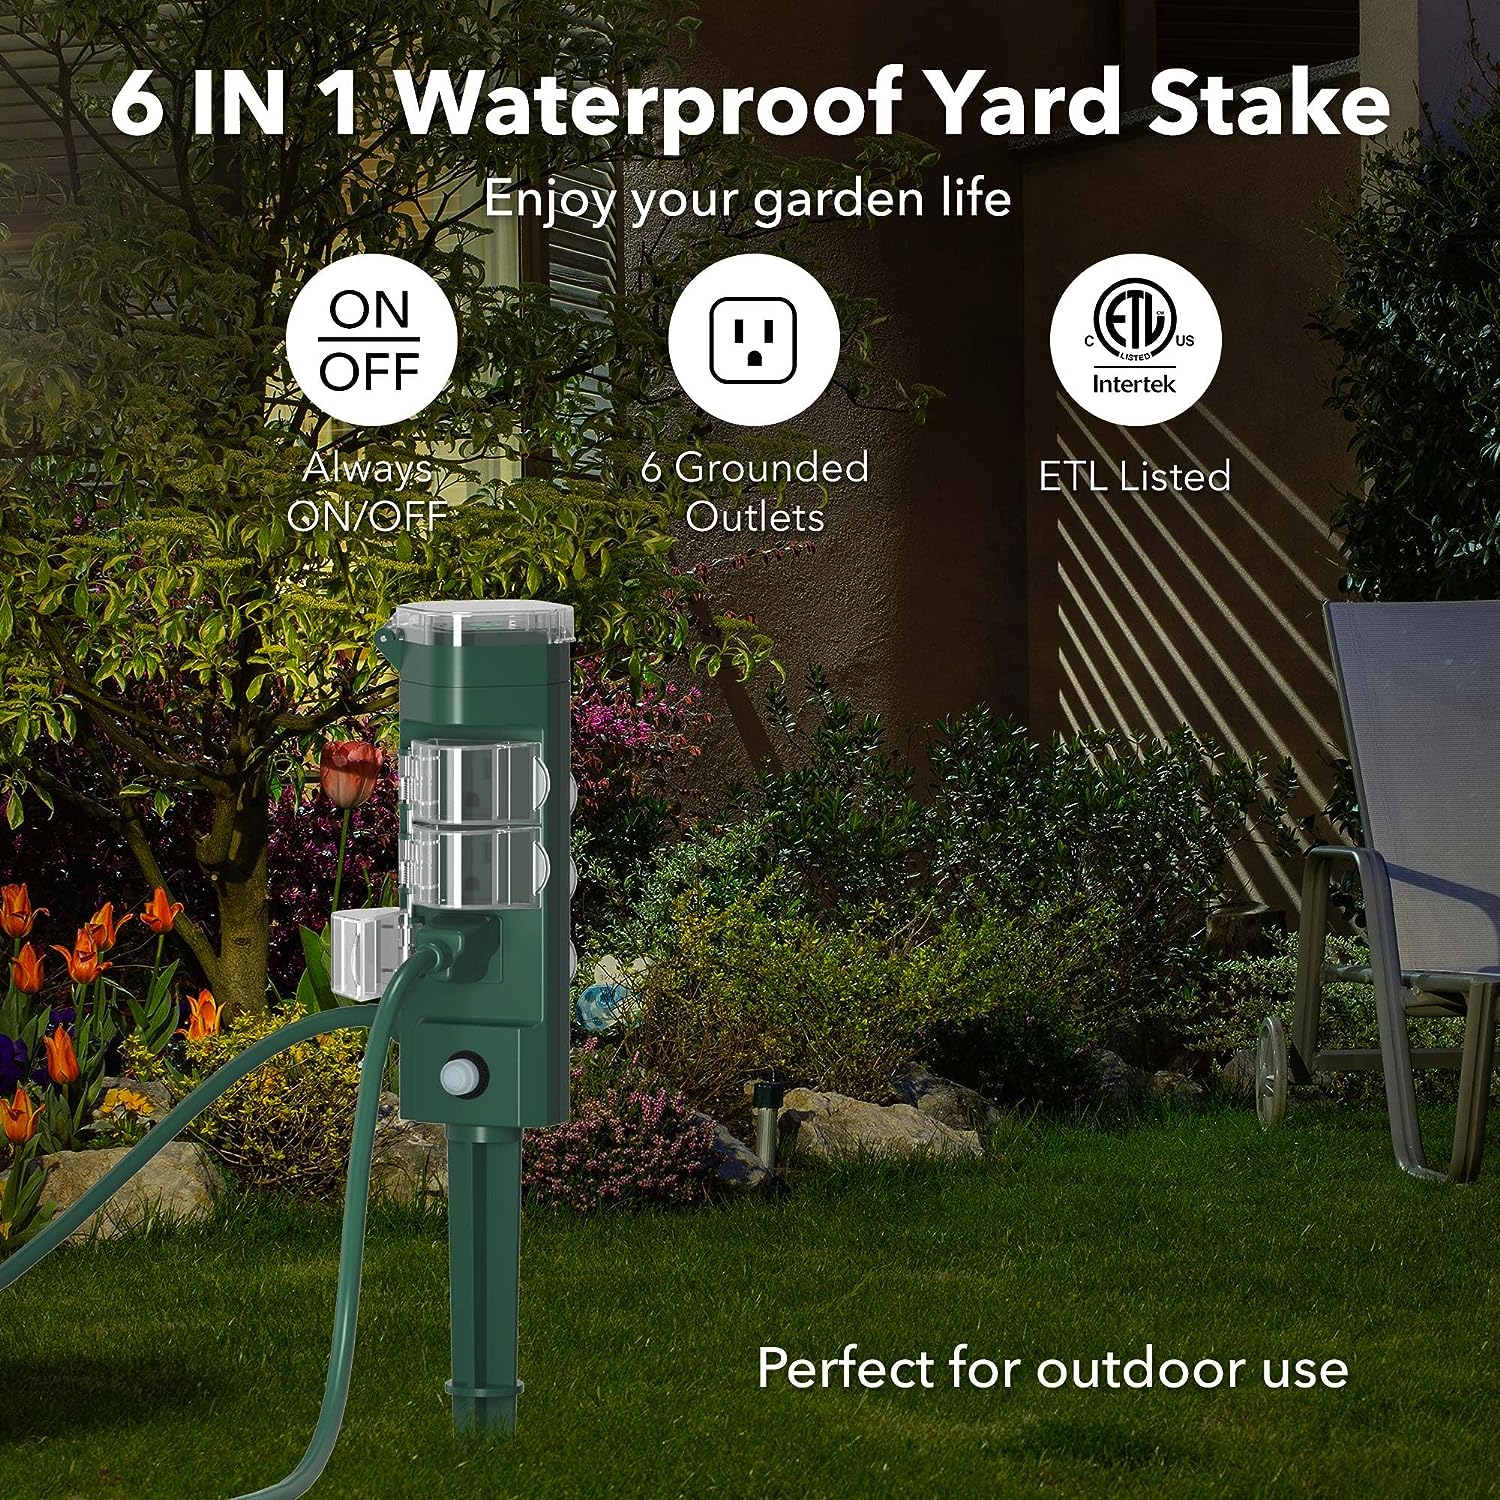 Outdoor Photocell Power Strip Yard Stake 6 Grounded Outlets Waterproof (2, 4, 6, 8 Hour) HBN - BN-LINK